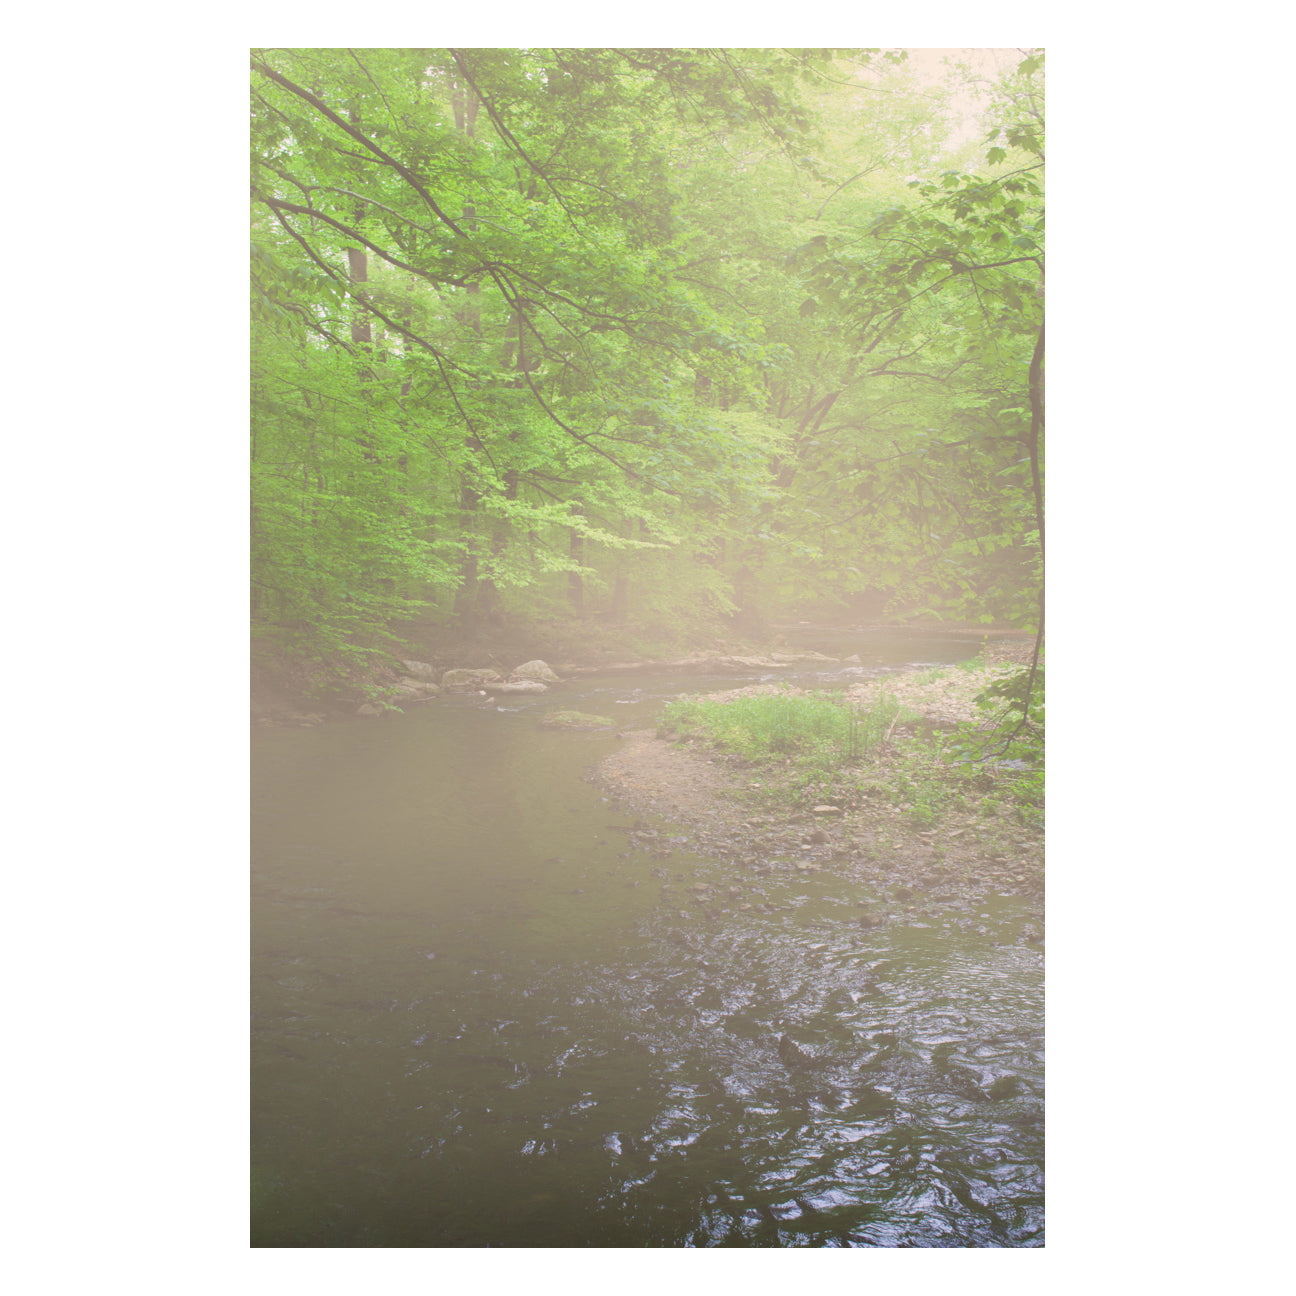 Early Morning Fog on the River Landscape Photo Fine Art Canvas Wall Art Prints  - PIPAFINEART